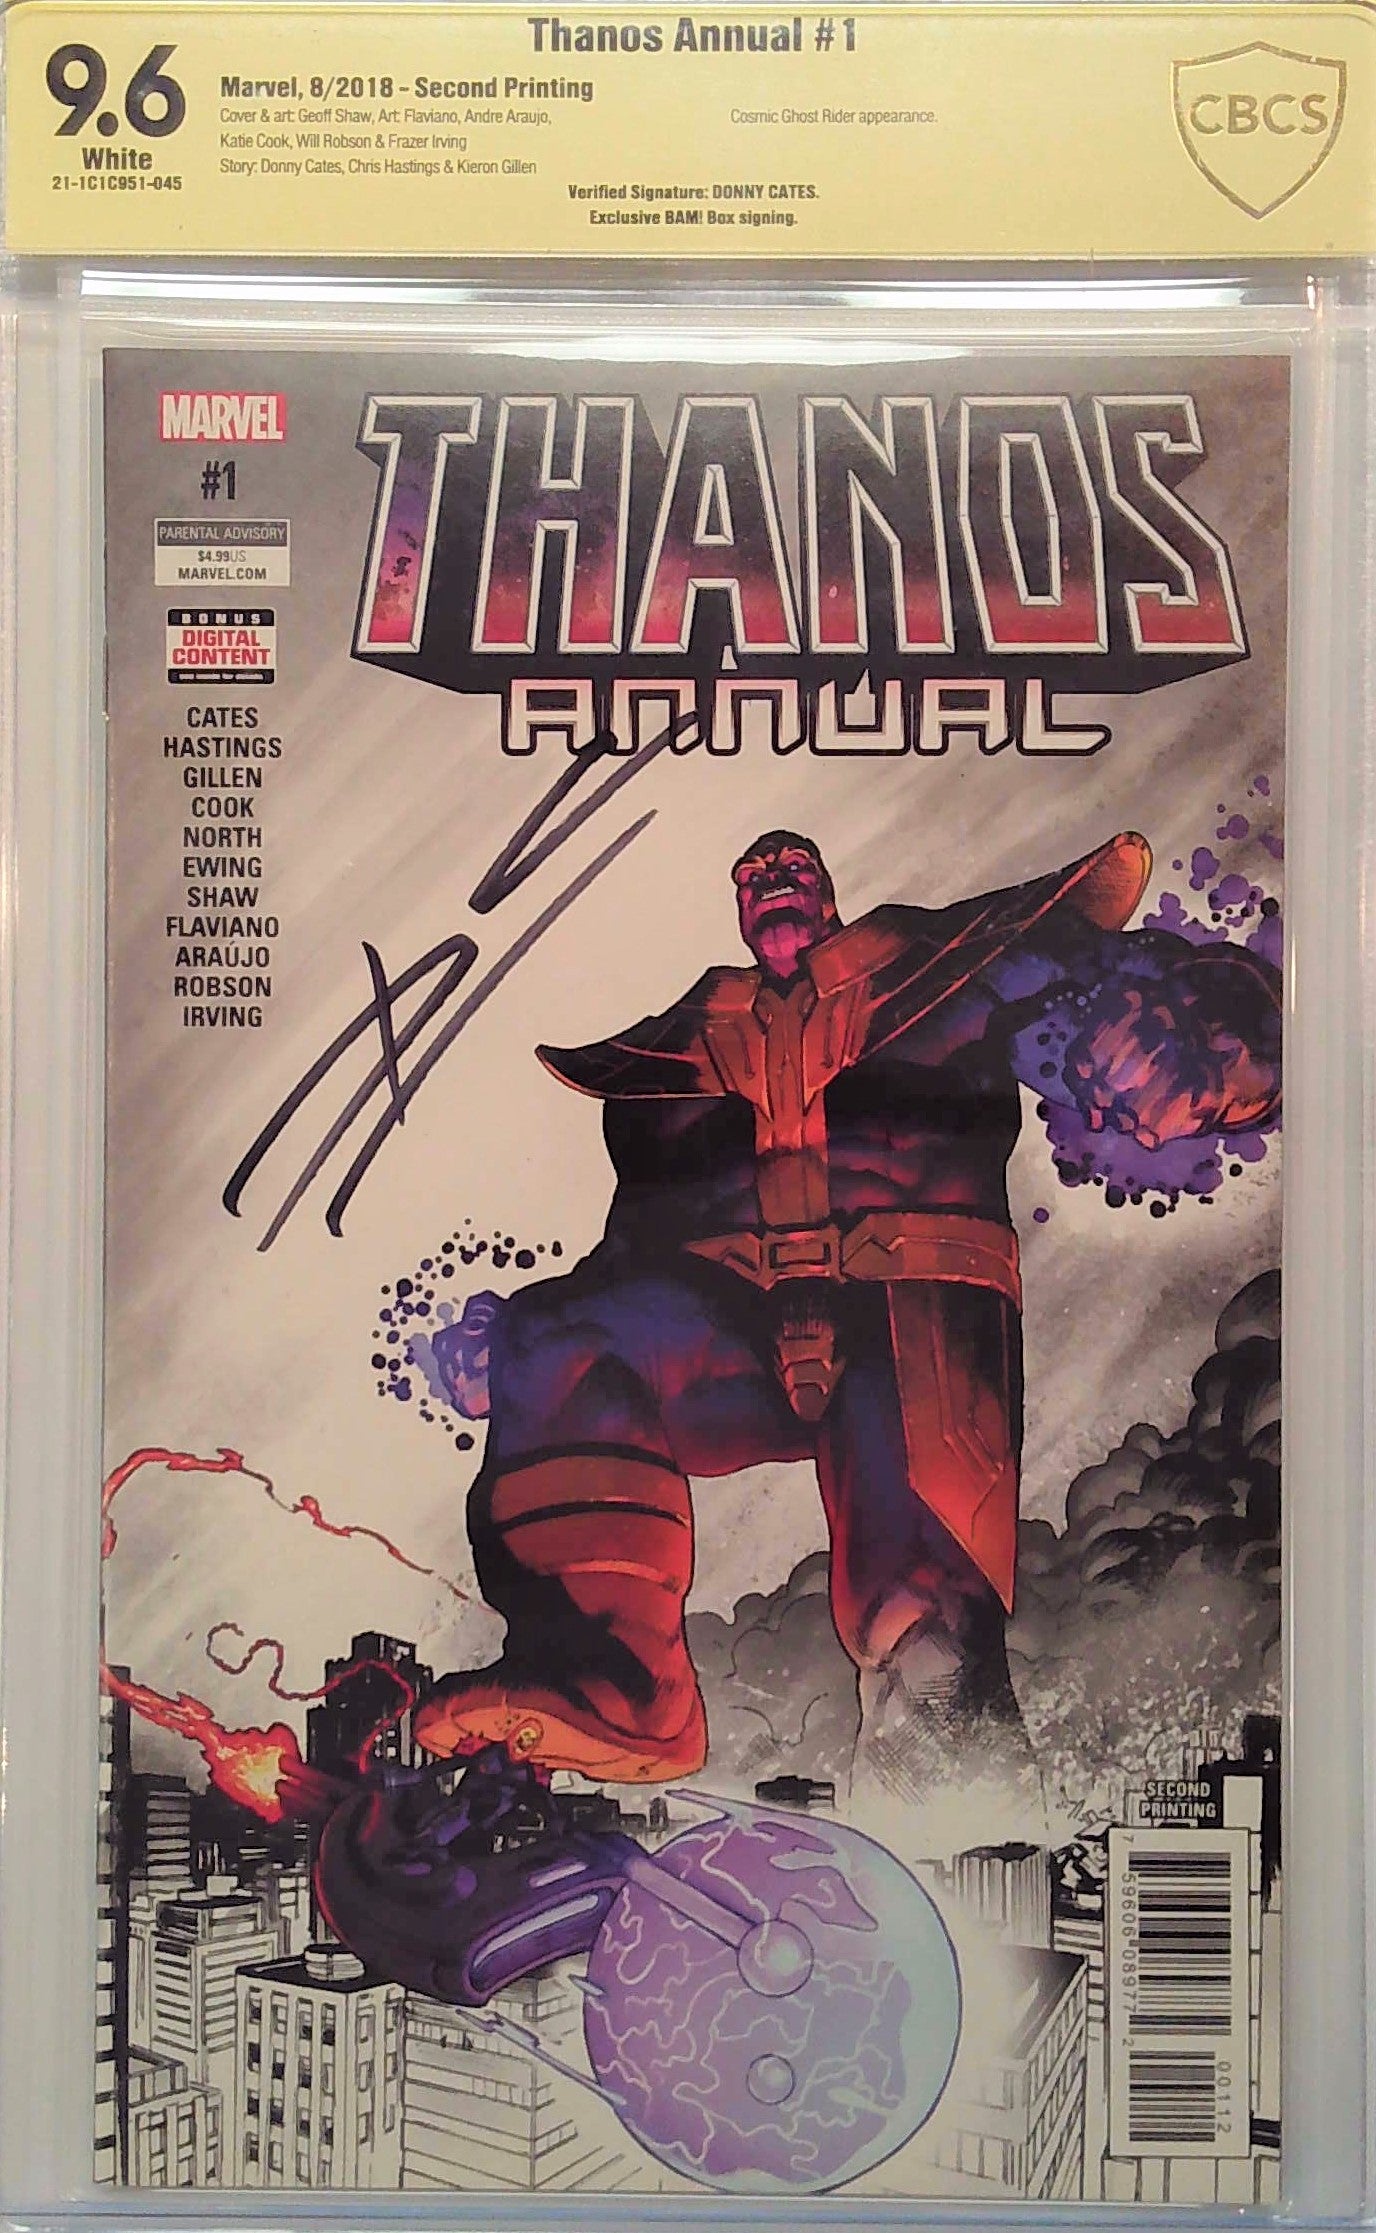 Thanos Annual #1 Second Printing CBCS 9.6 Yellow Label Marvel Comics Donny Cates Signature